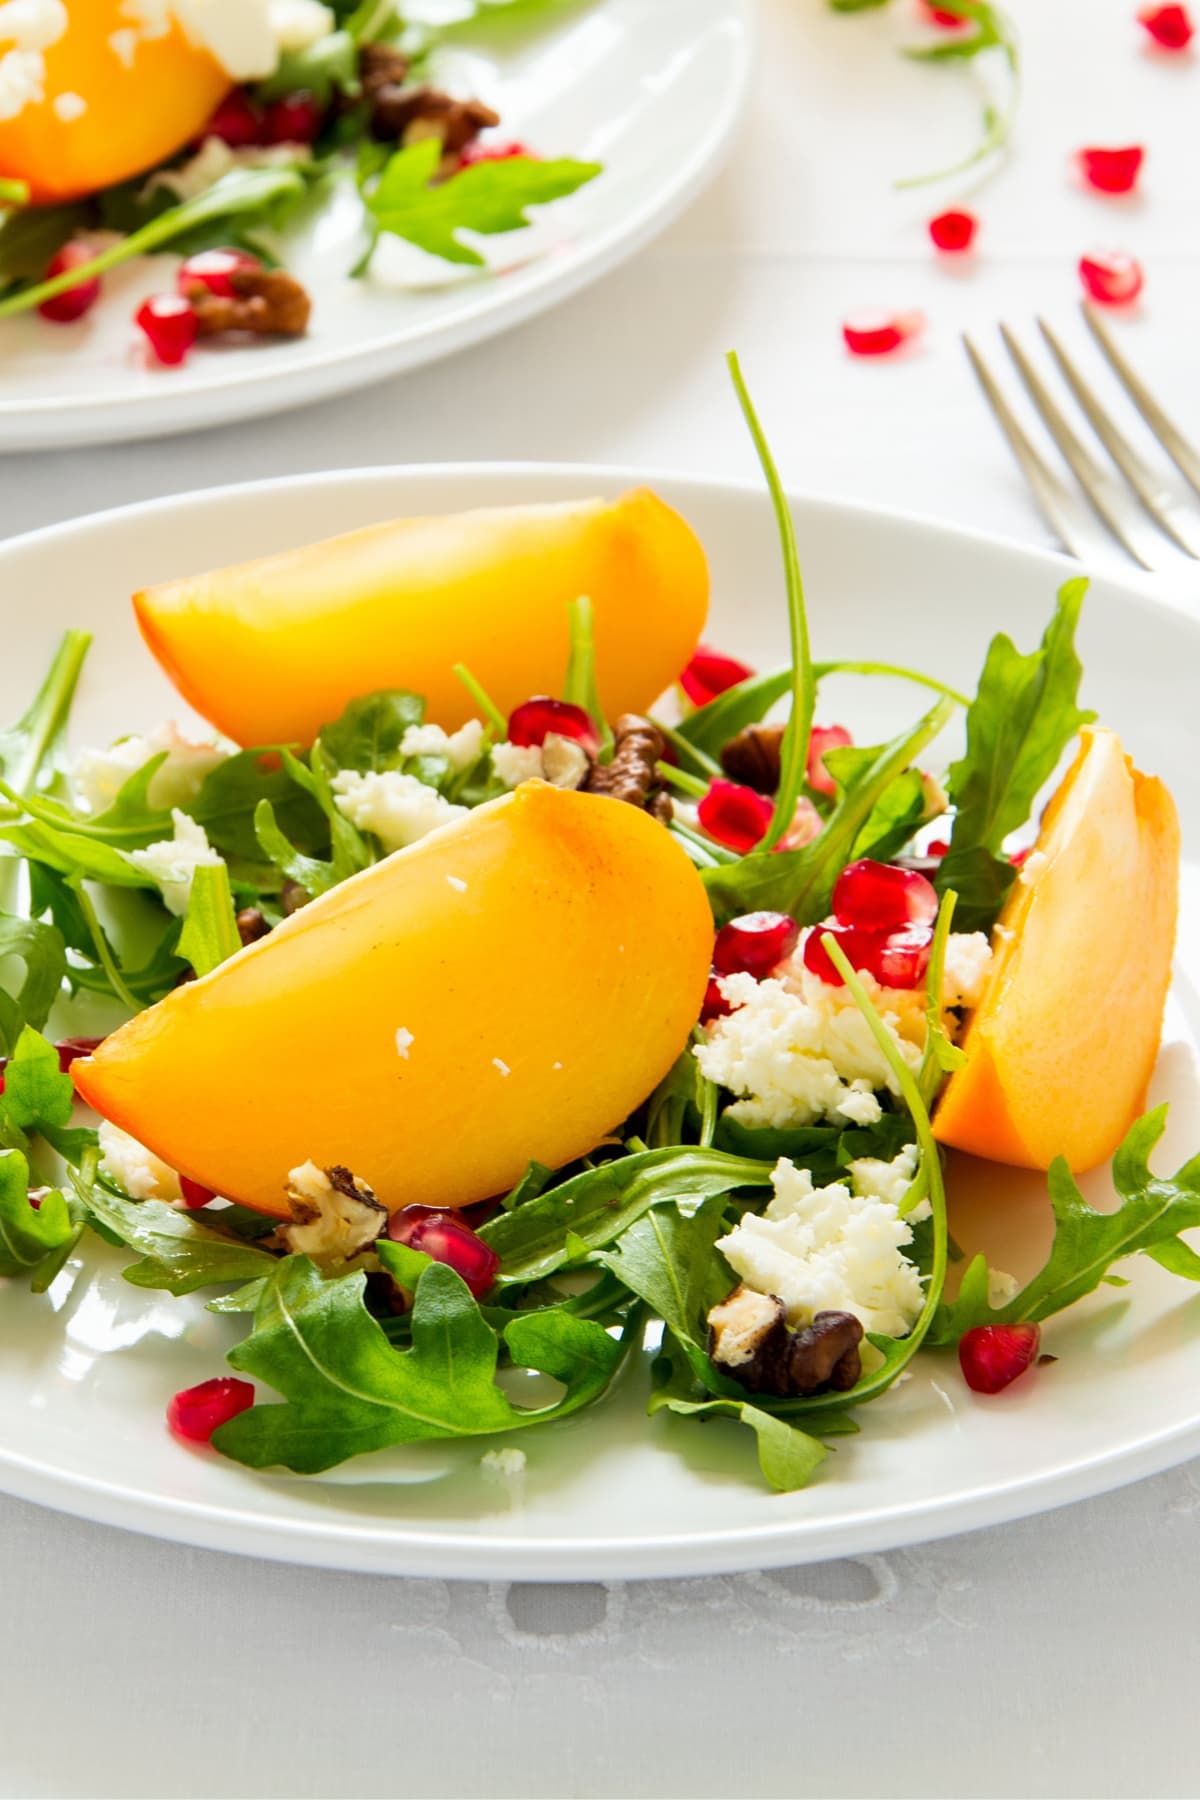 Healthy Persimmon Salad with Pomegranate and Arugula